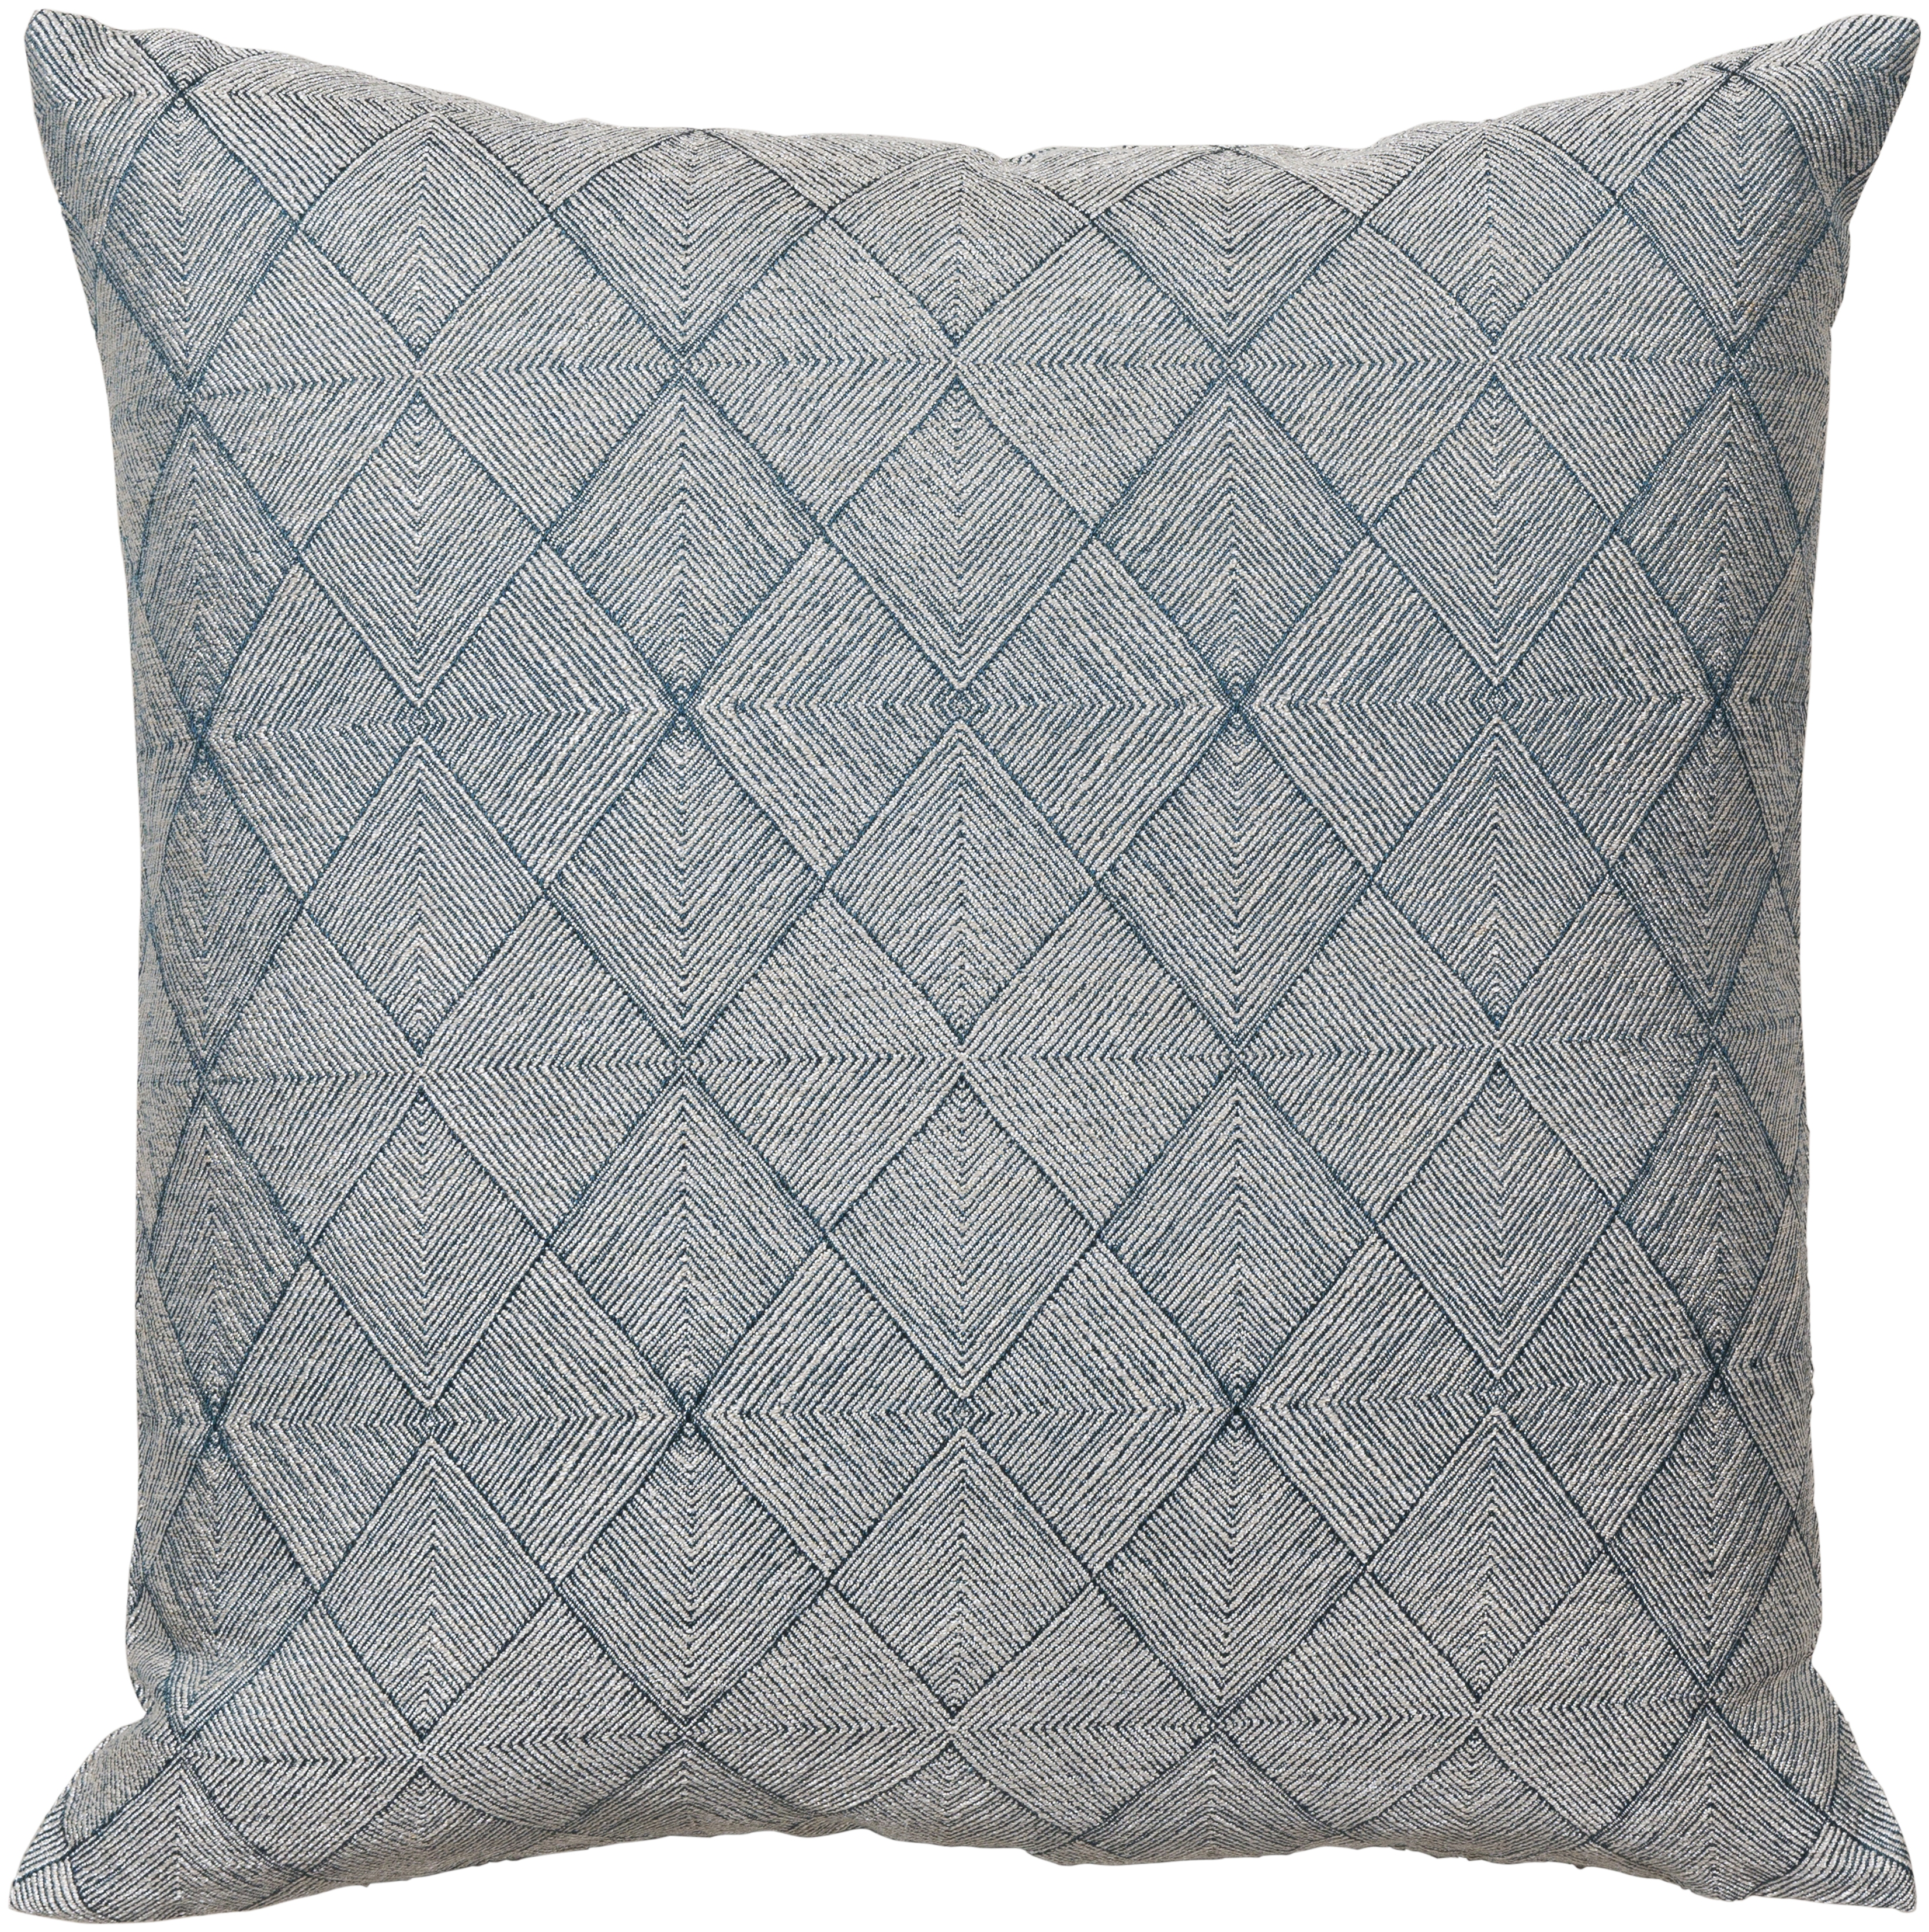 Messina - MSA-001 - 18" x 18" - pillow cover only - Image 0